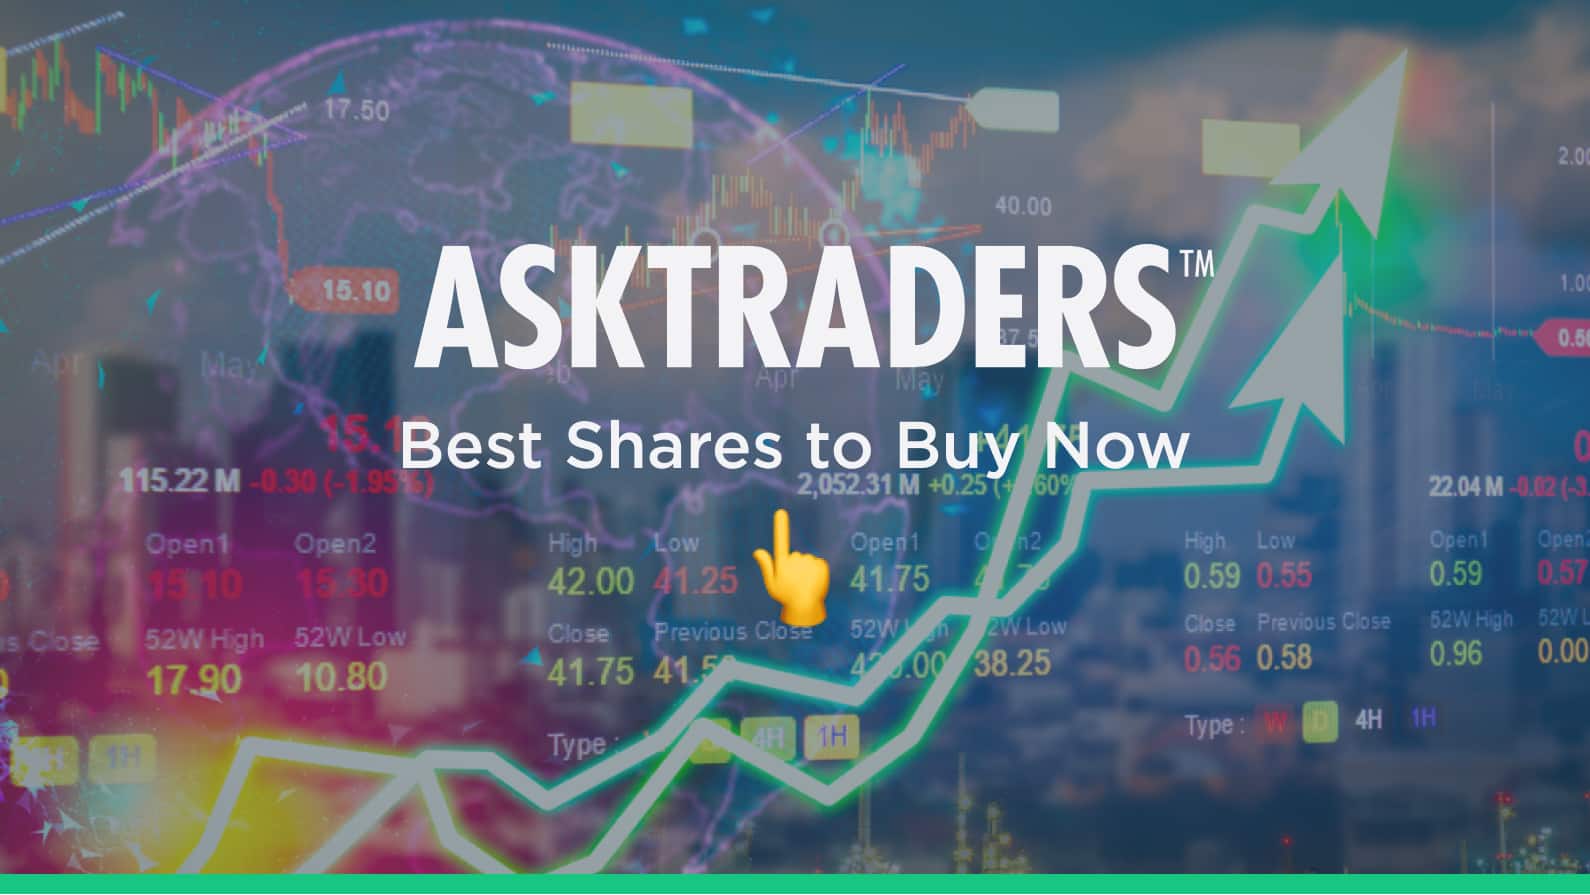 The 5 Best Shares To Buy Now